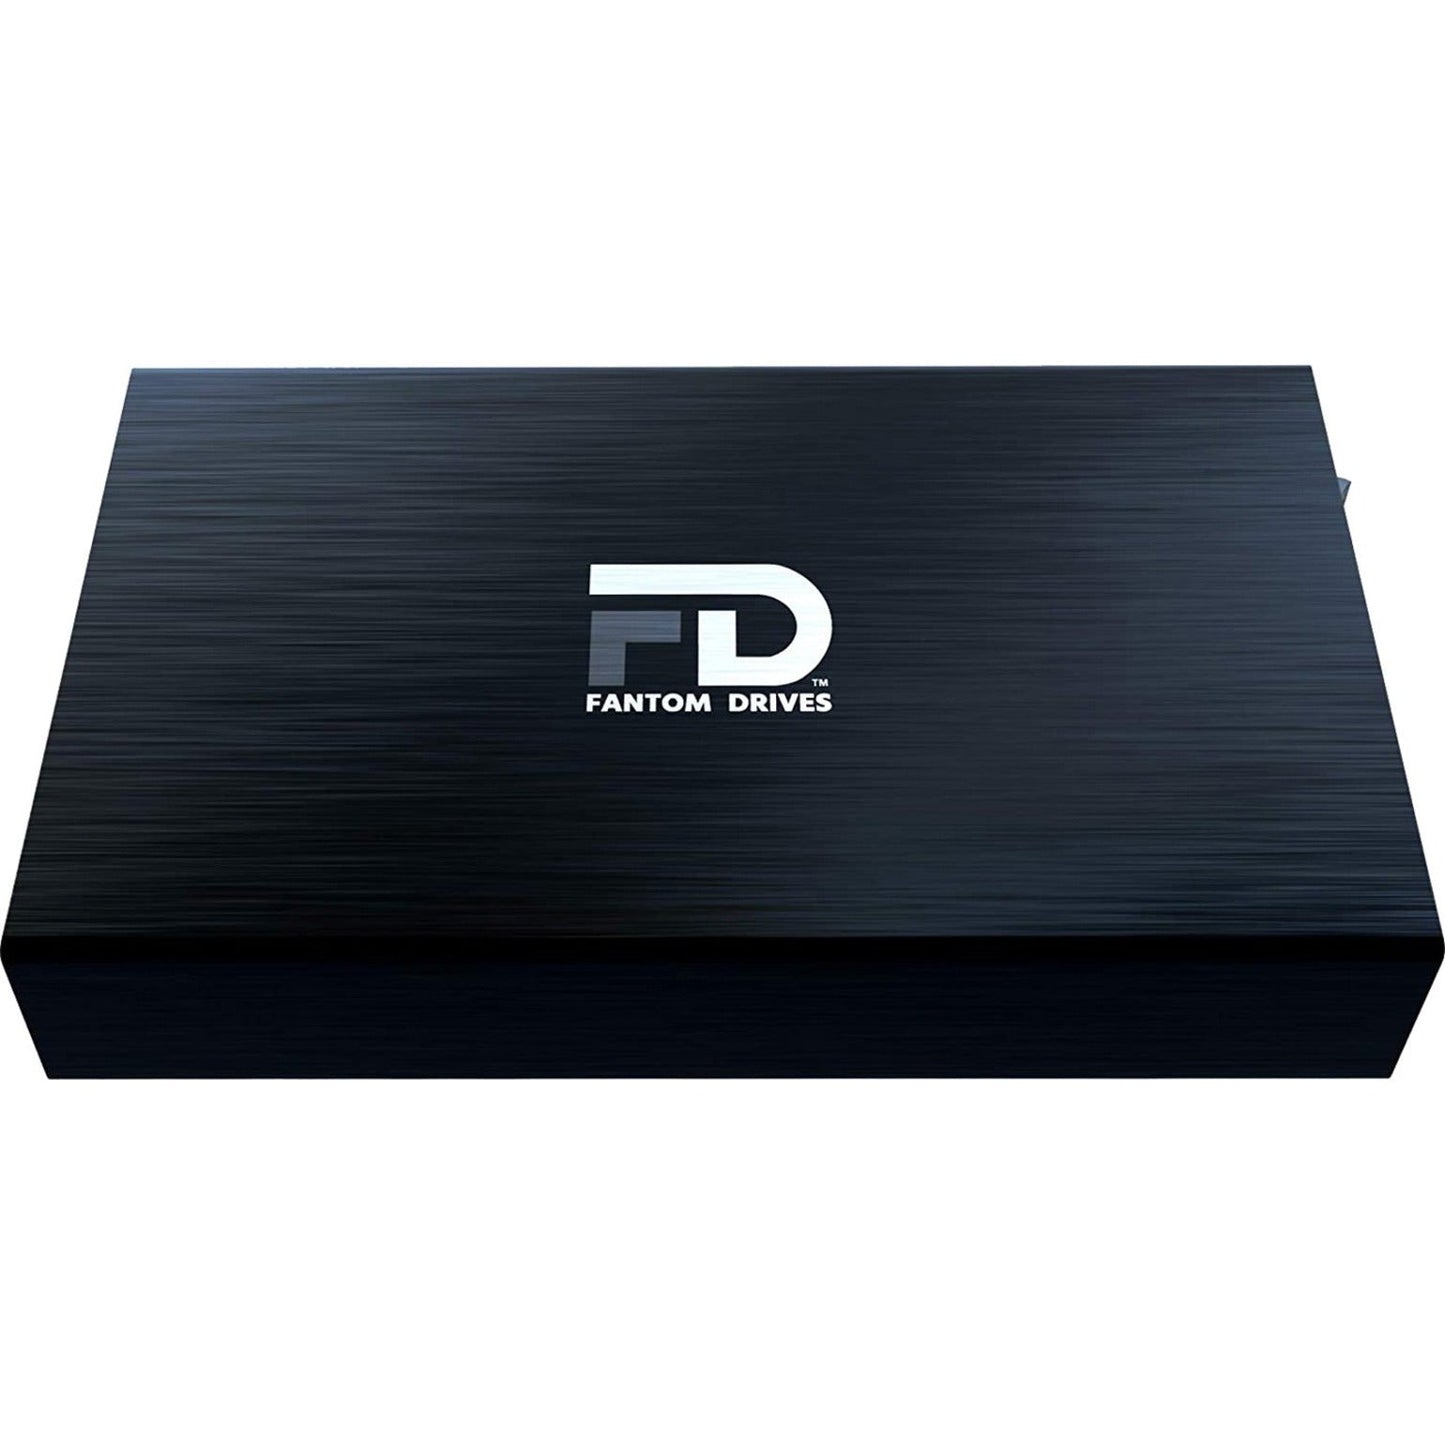 Fantom Drives FD GFORCE 1TB 7200RPM External Hard Drive - USB 3.2 Gen 1 & eSATA - Black - Compatible with Windows & Mac - Made with High Quality Aluminum - 1 Year Warranty. Extra year of warranty when registered with Fantom Drives - (GFP1000EU3)